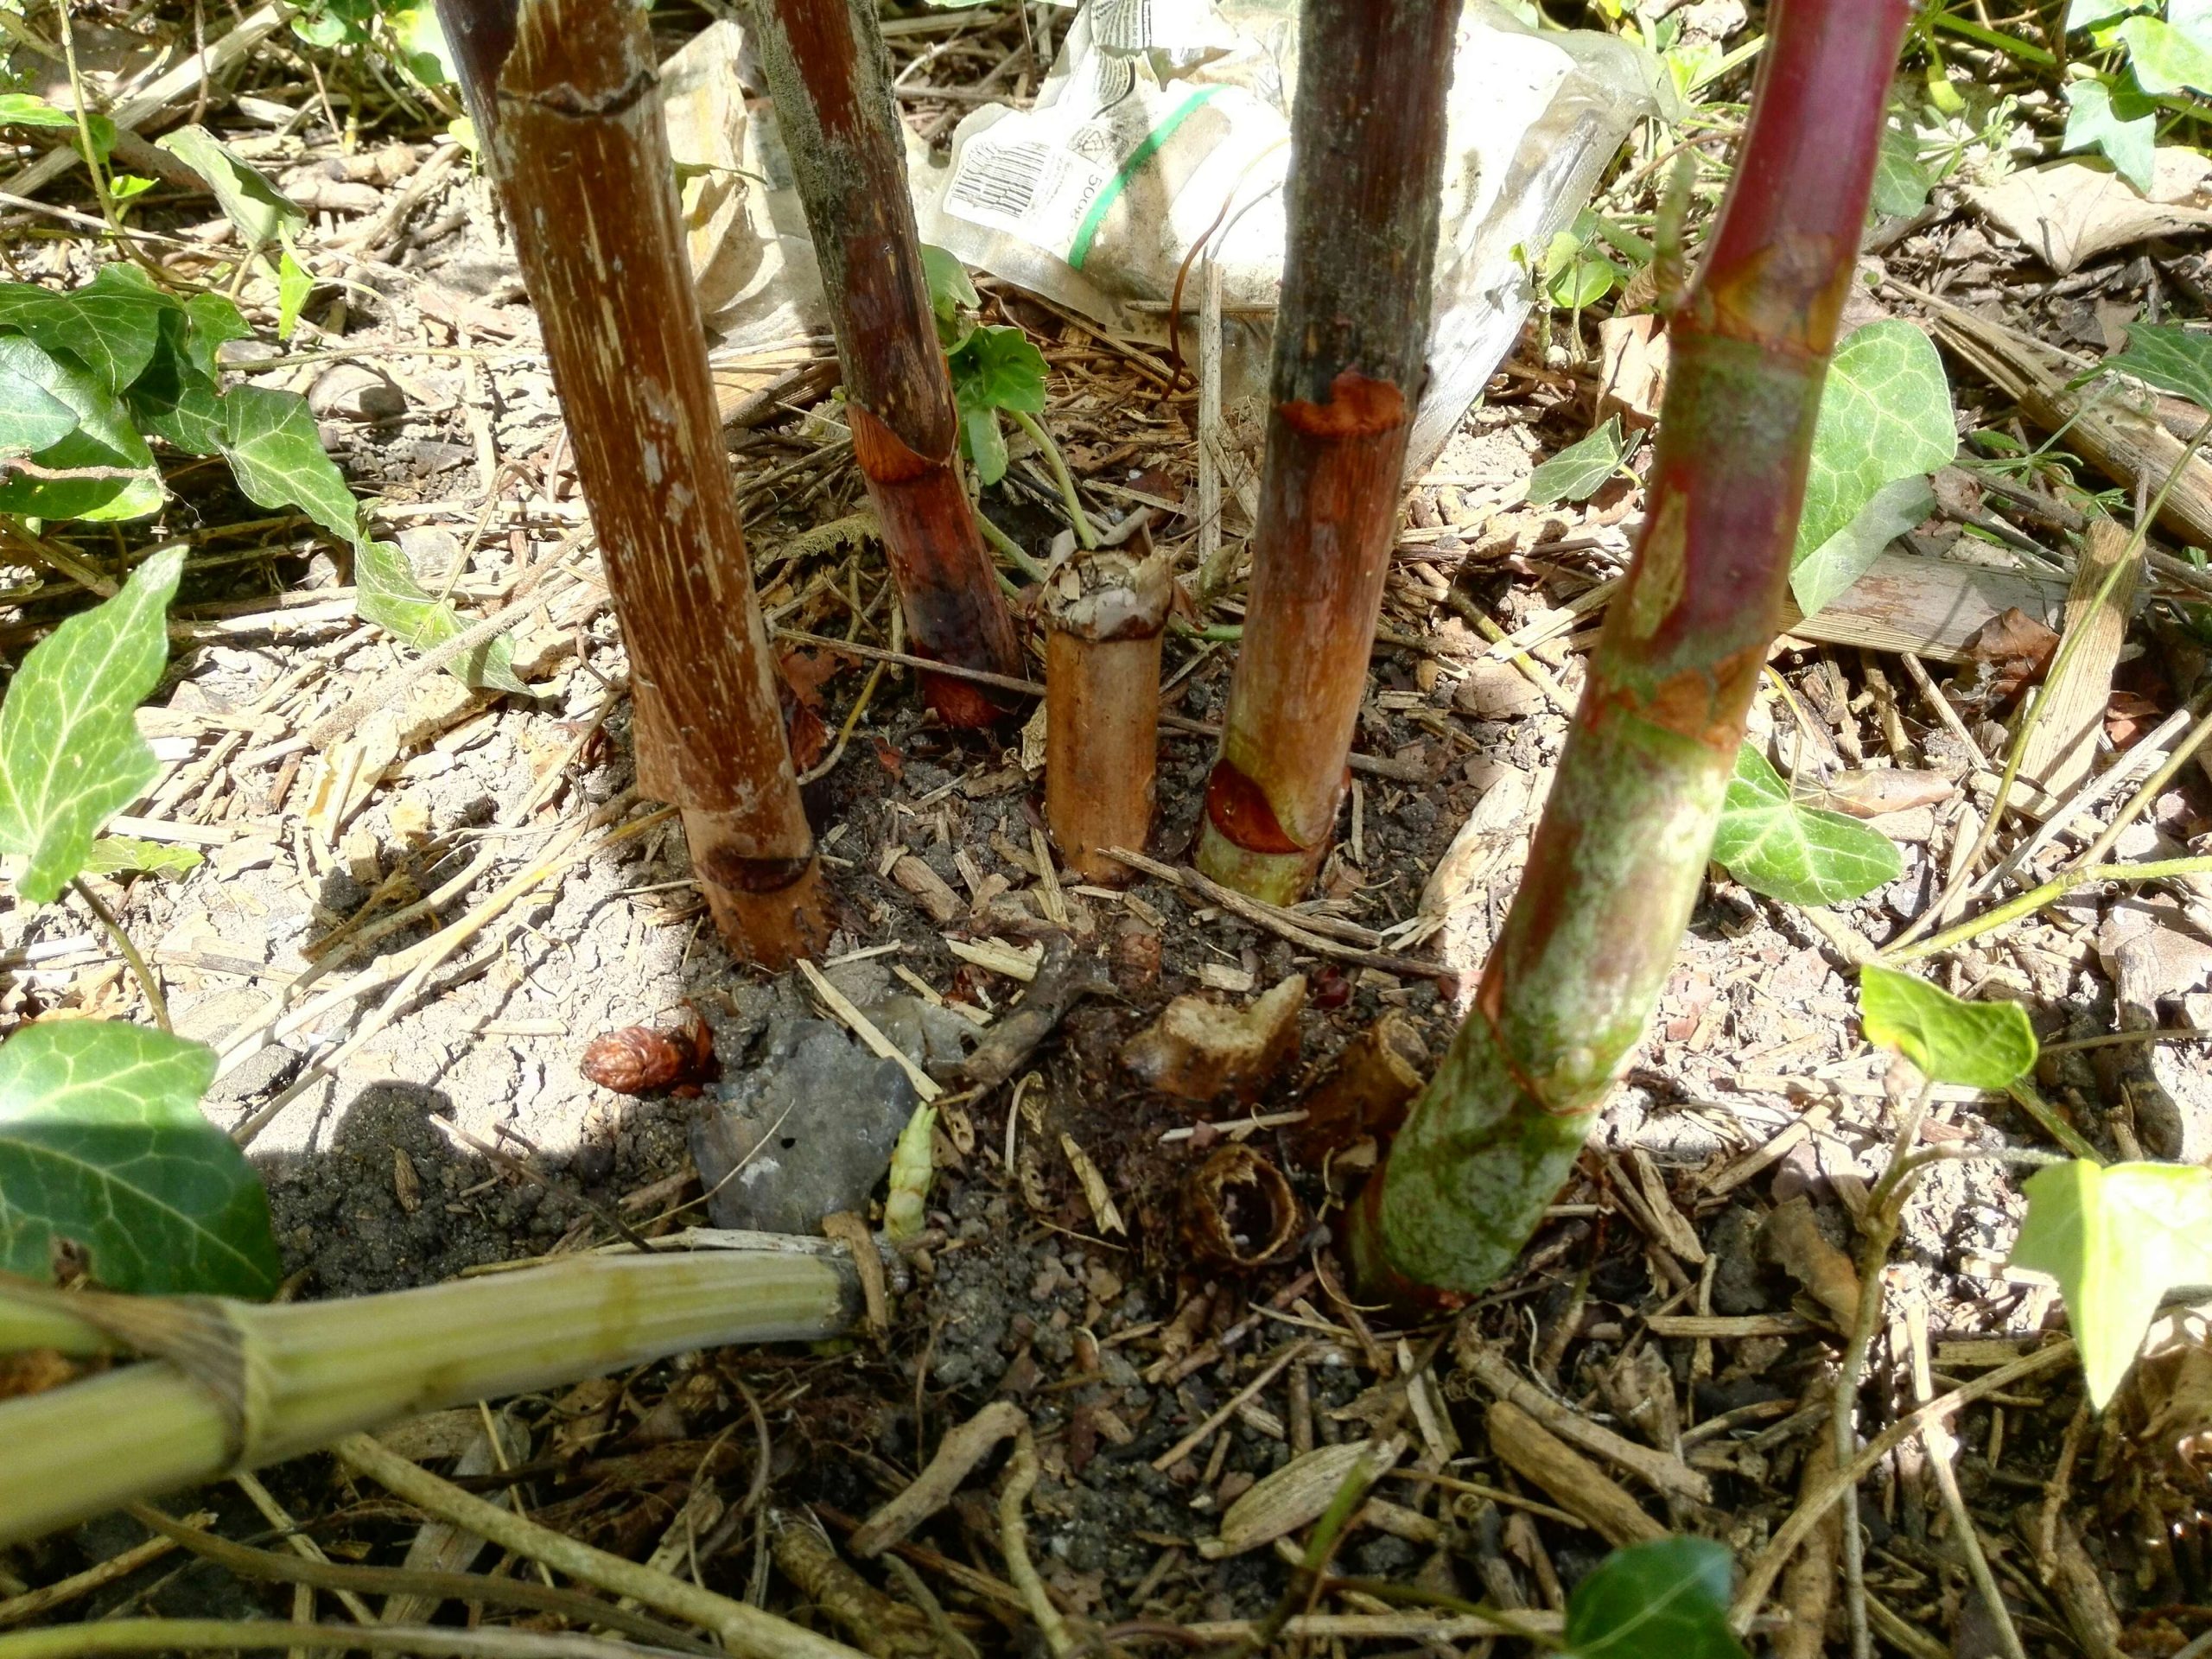 Removing knotweed from development site